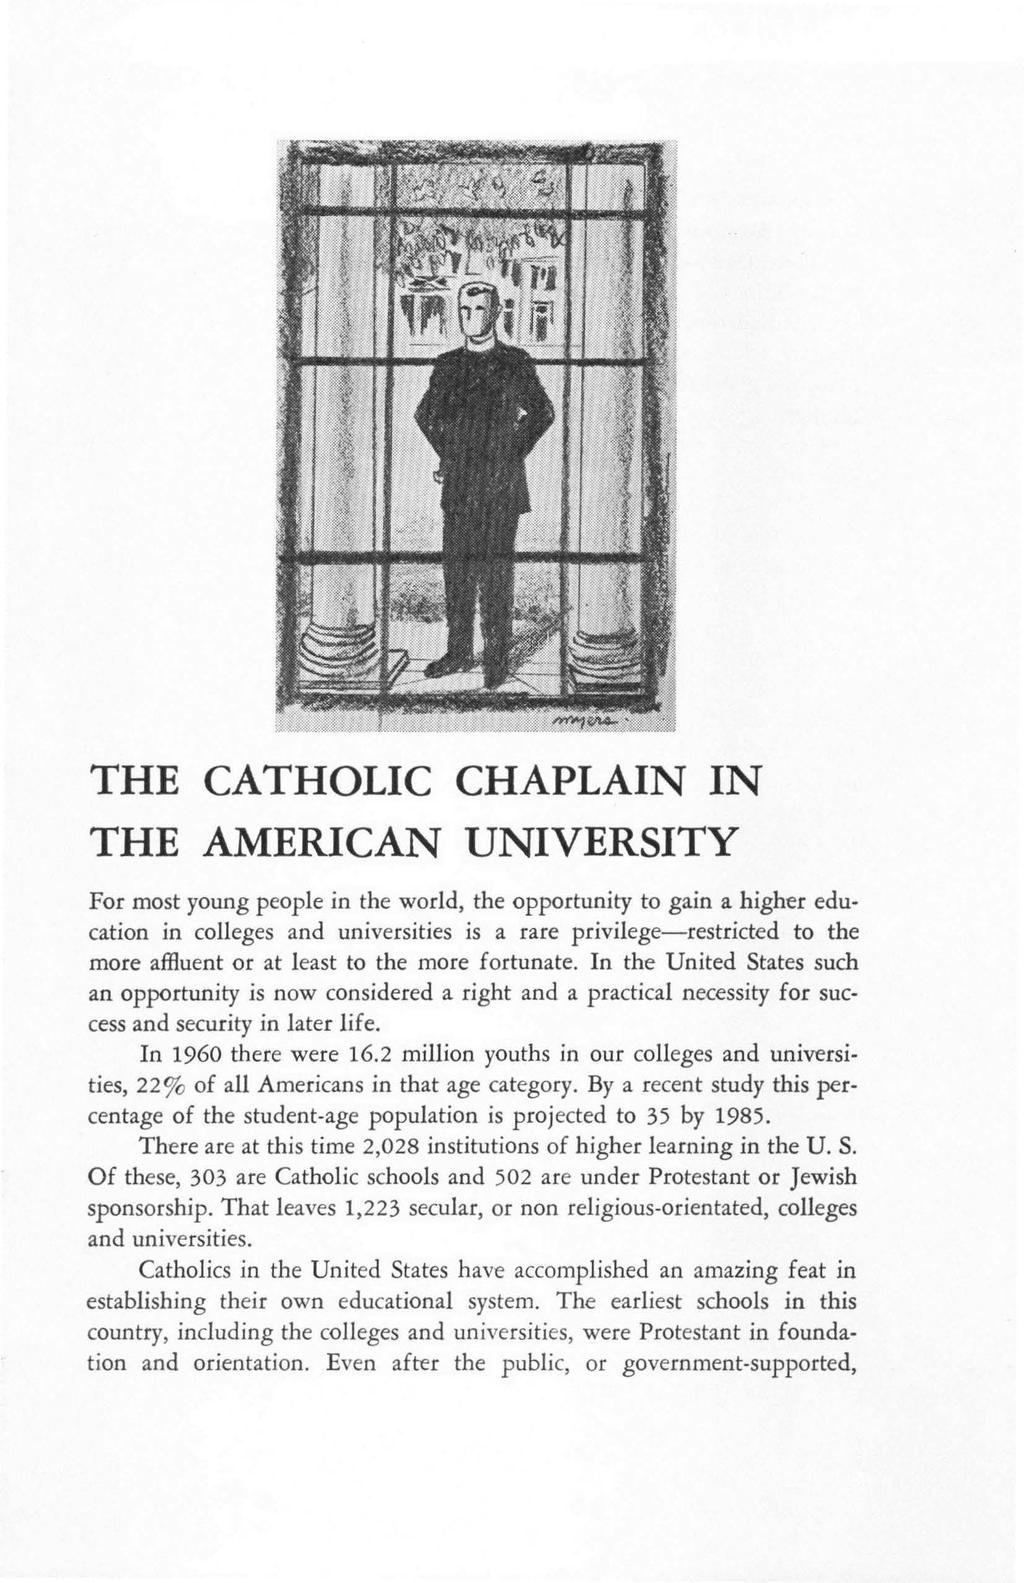 THE CATHOLIC CHAPLAIN IN THE AMERICAN UNIVERSITY For most young people in the world, the opportunity to gain a higher education in colleges and universities is a rare privilege-restricted to the more